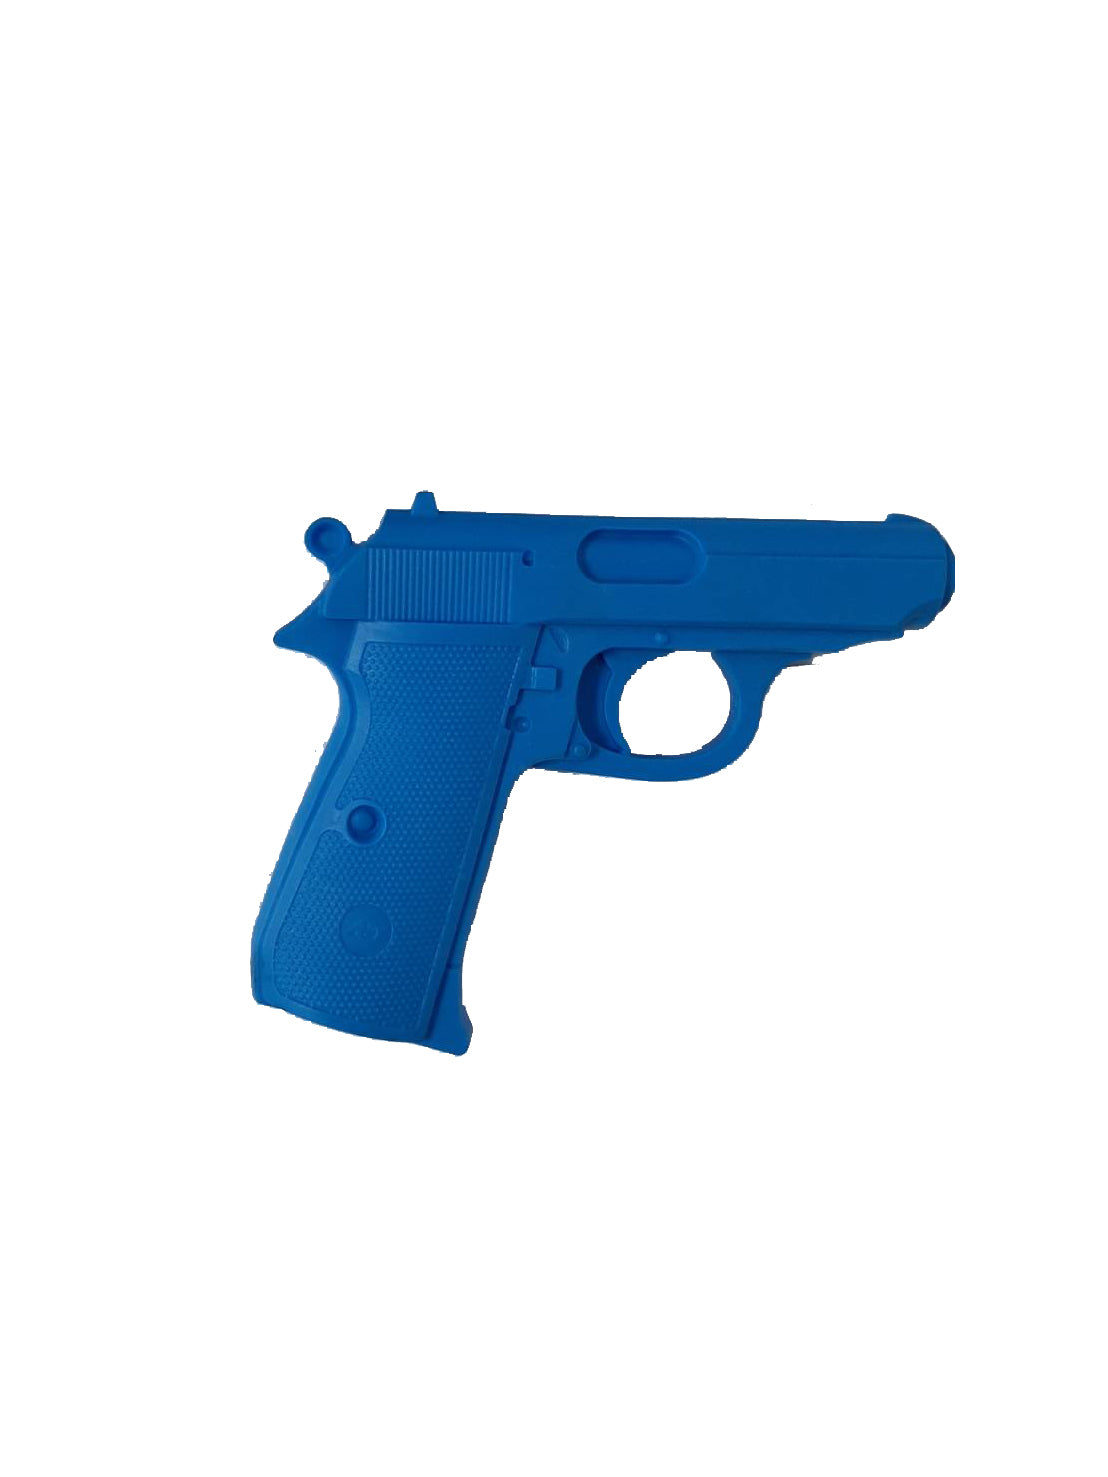 Rubber Standard Walther PPK Training Gun Pistol Safety Color